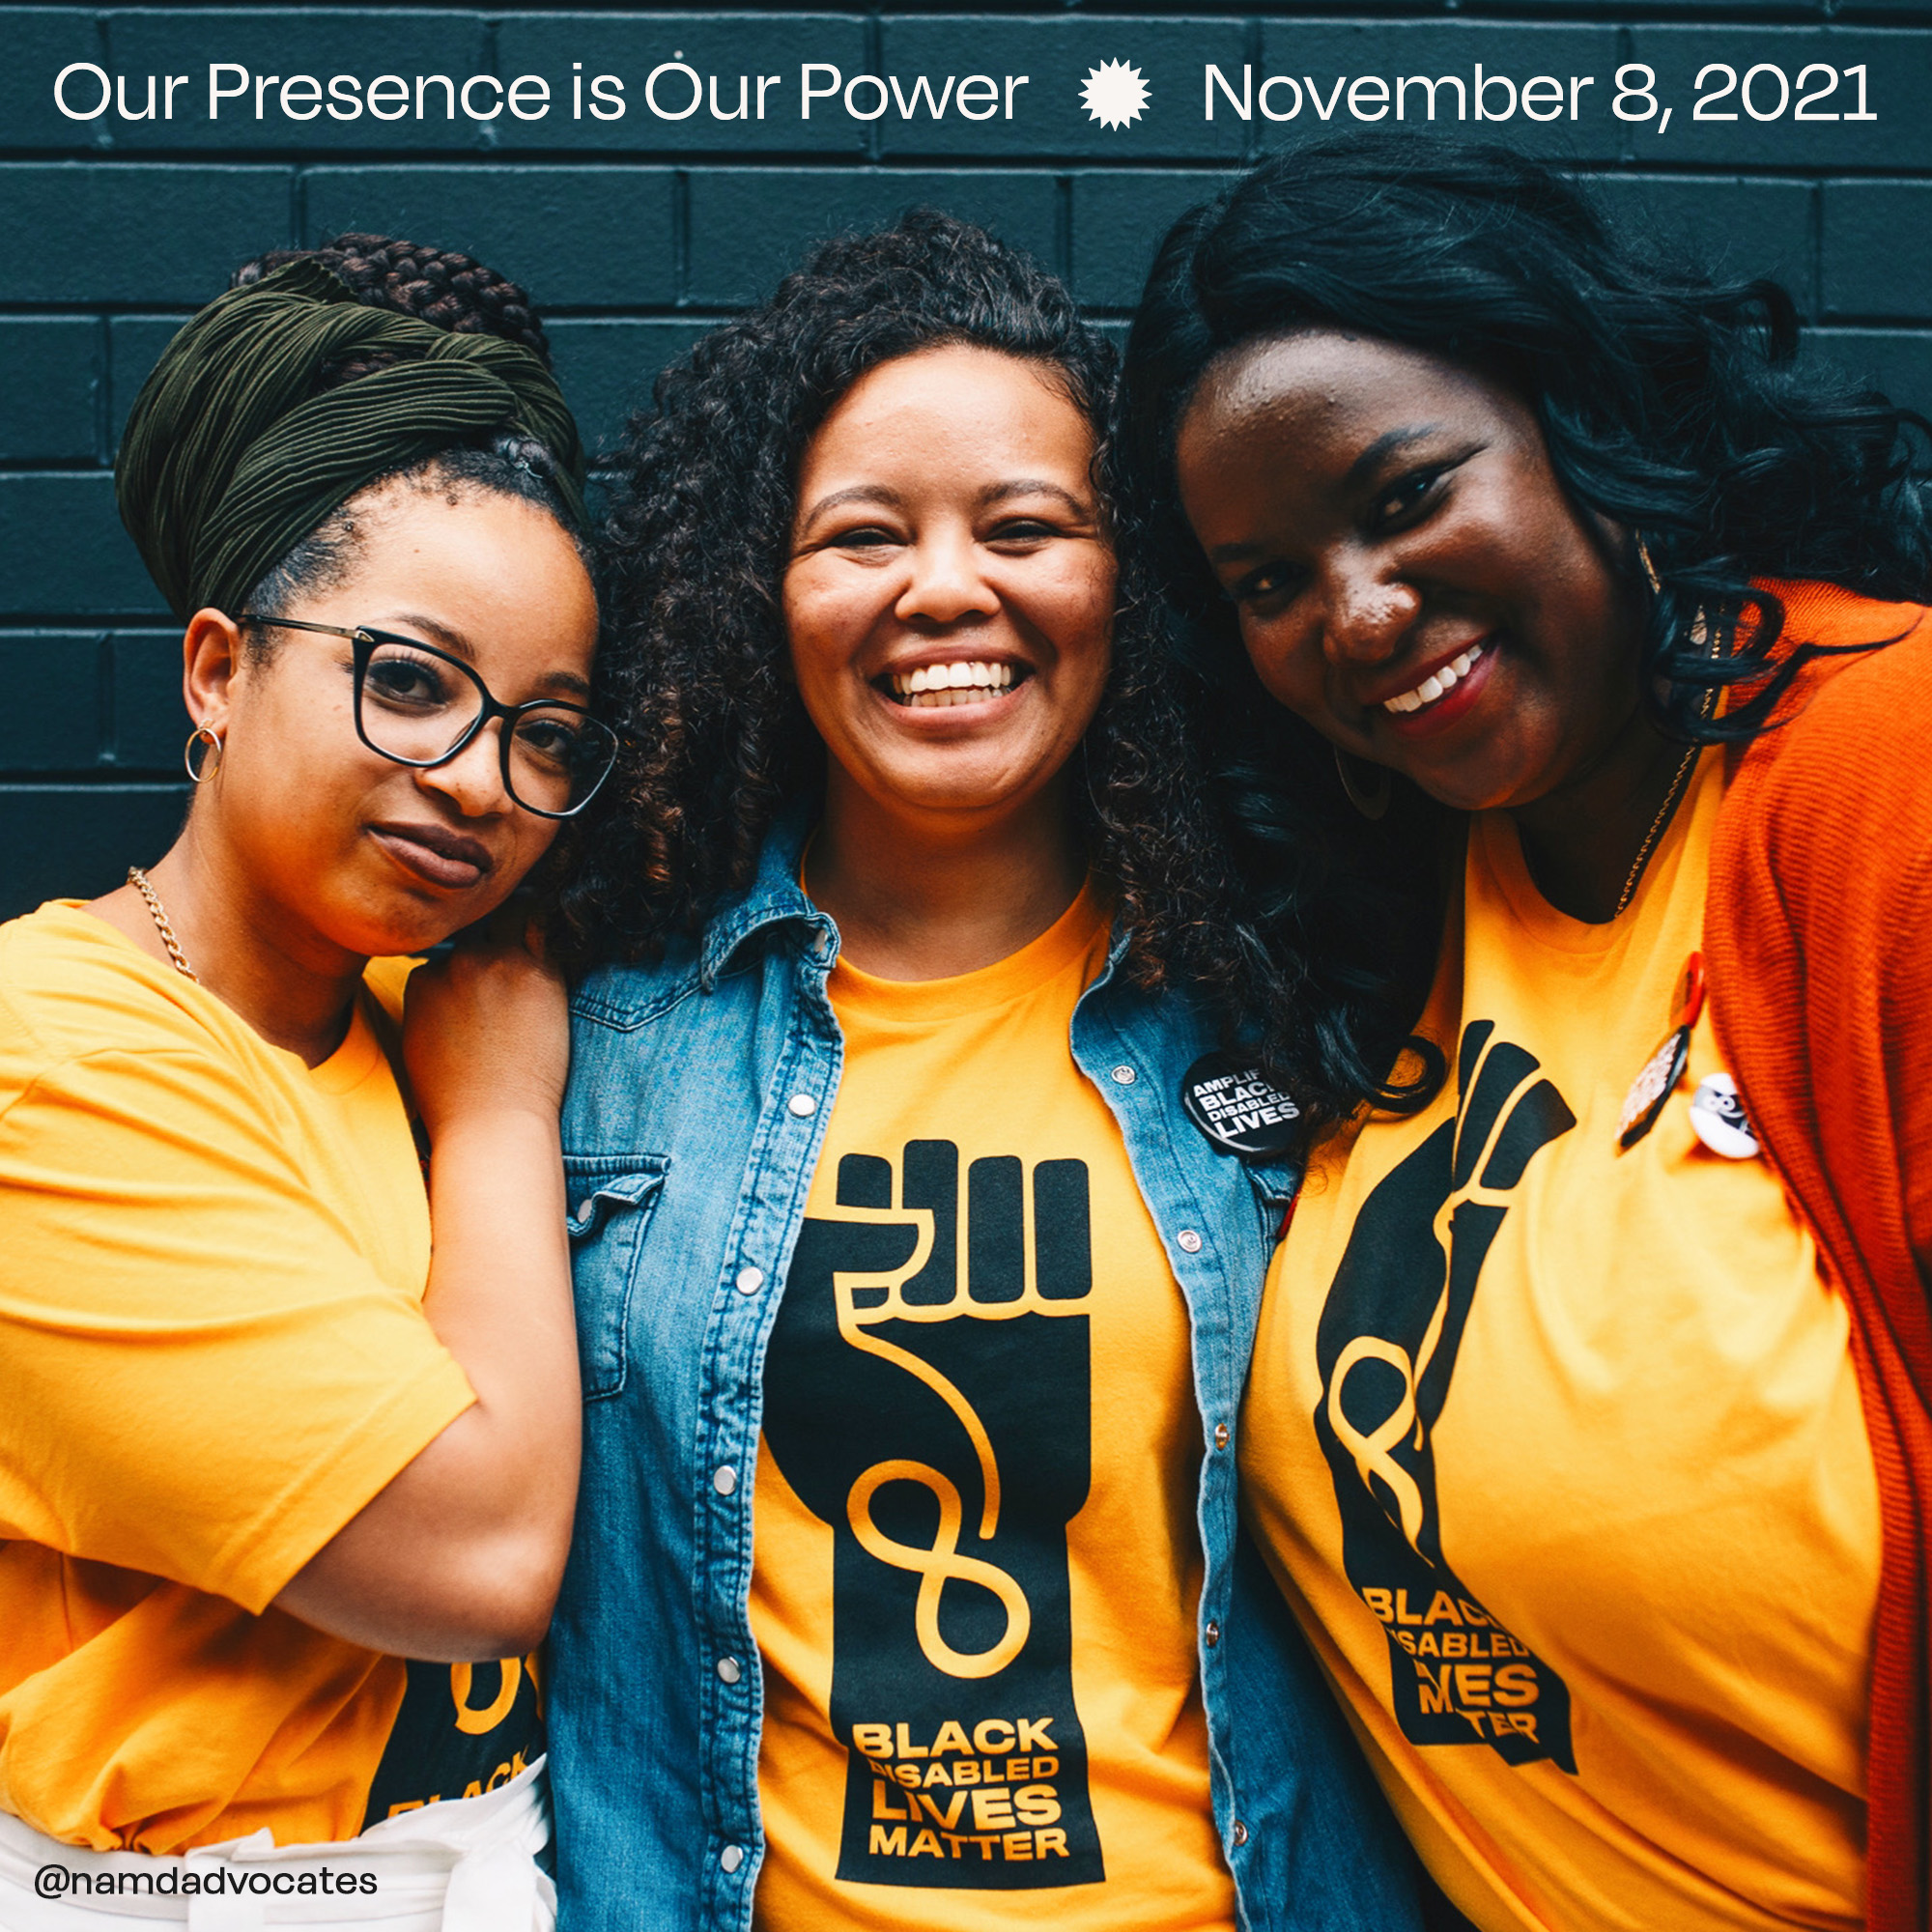 Three Black women are standing in front of a black brick wall, they are each wearing a yellow t-shirt that says ‘Black Disabled Lives Matter’ inside of a Black fist. The top of the photo has white text that says Our Presence is Our Power * November 8, 2021. @namdadvocates.